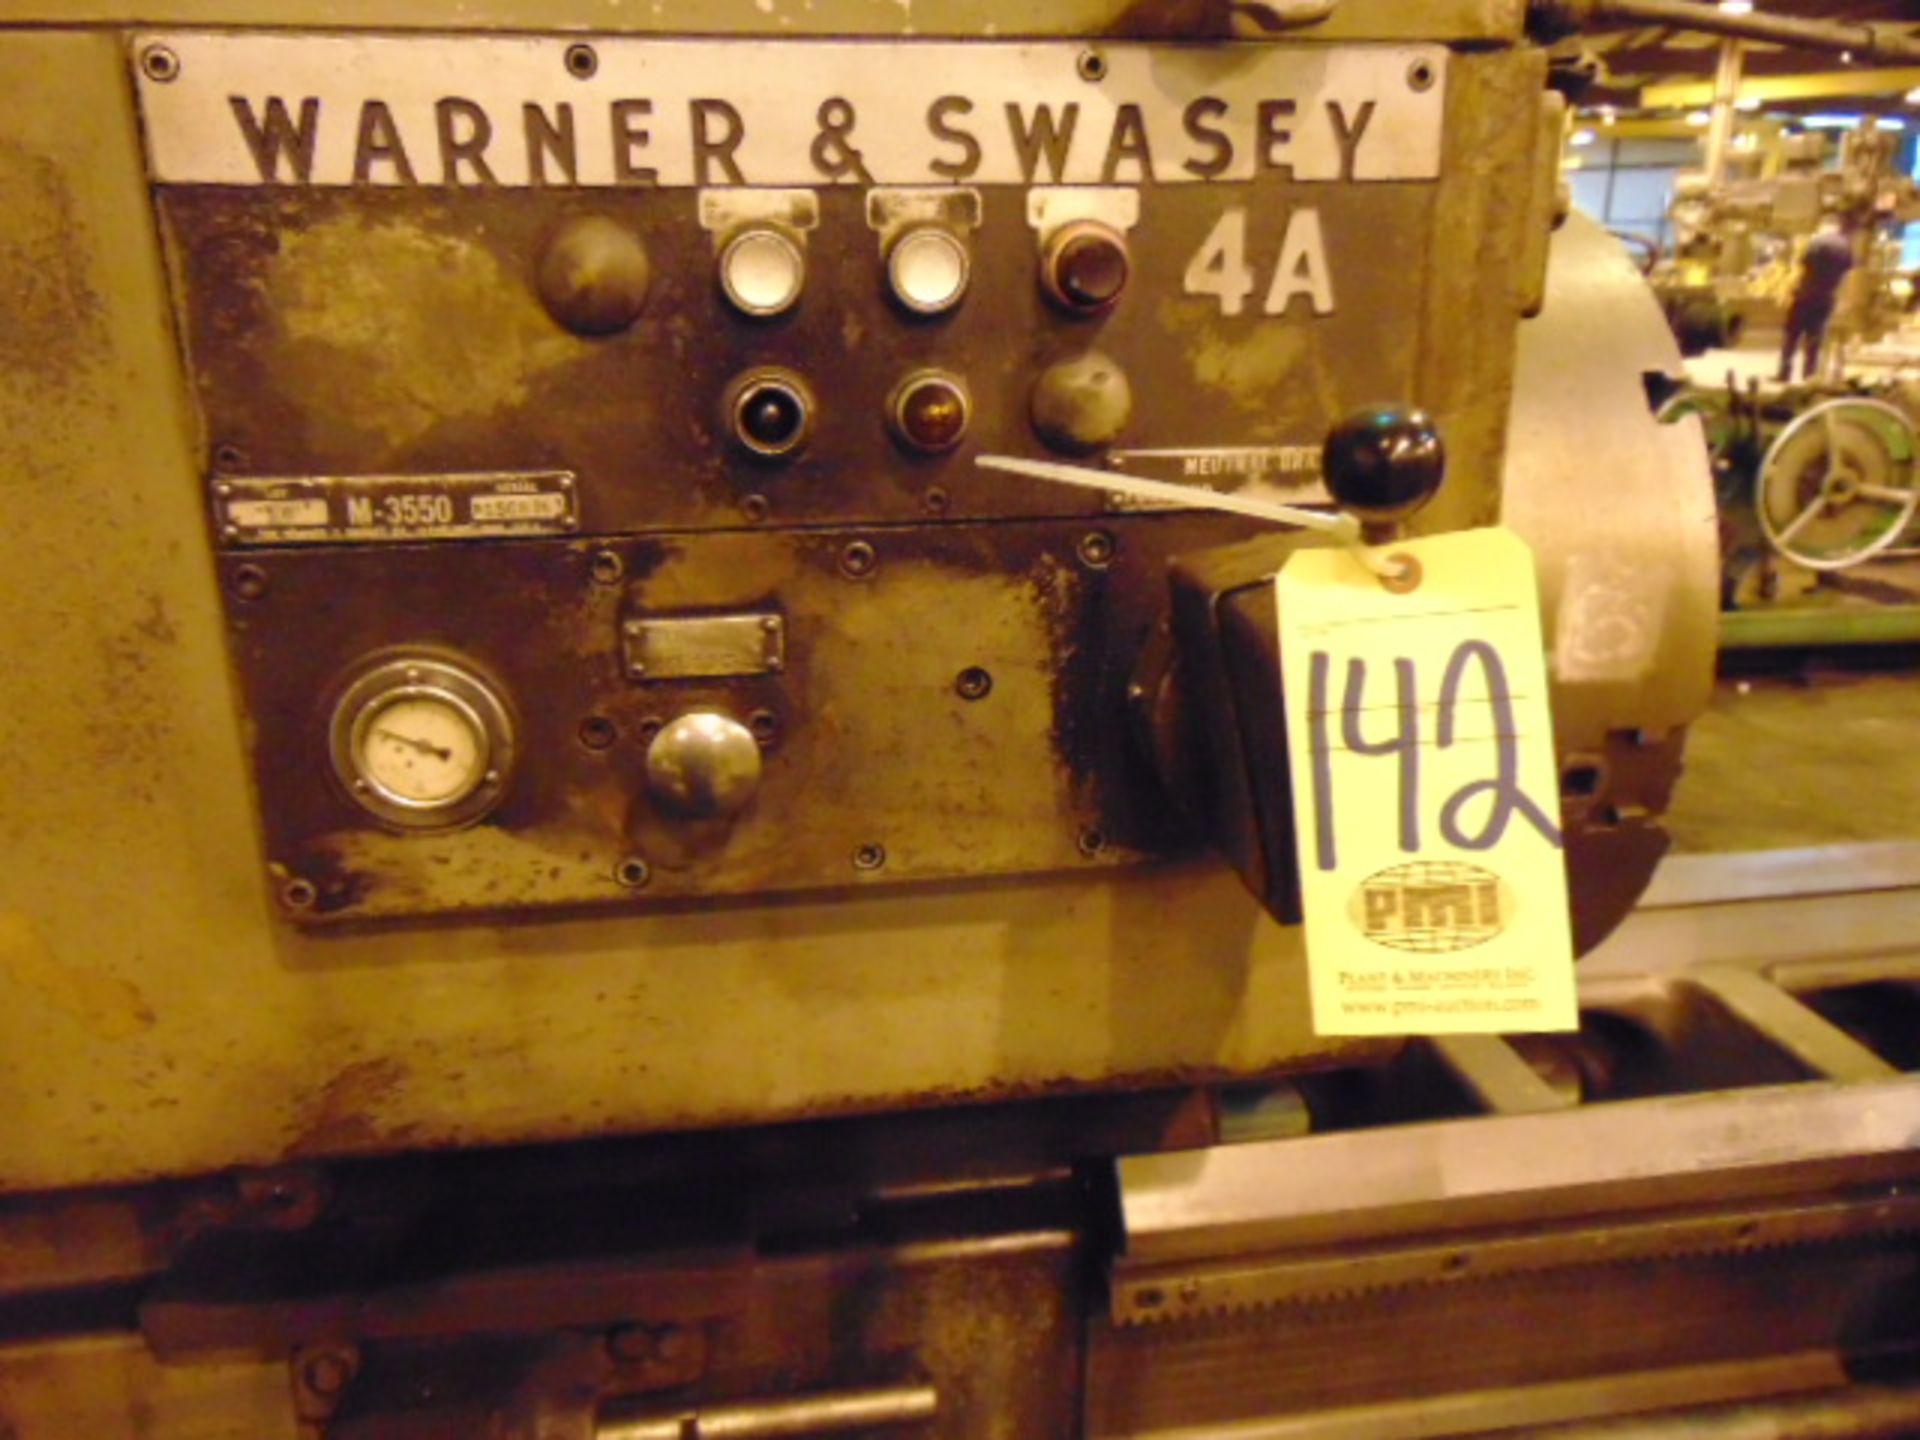 TURRET LATHE, WARNER & SWASEY MDL. 4A, M-3550, 9-1/2" spdl. bore, 6 pos. turret, fixed turret, 24" - Image 12 of 13